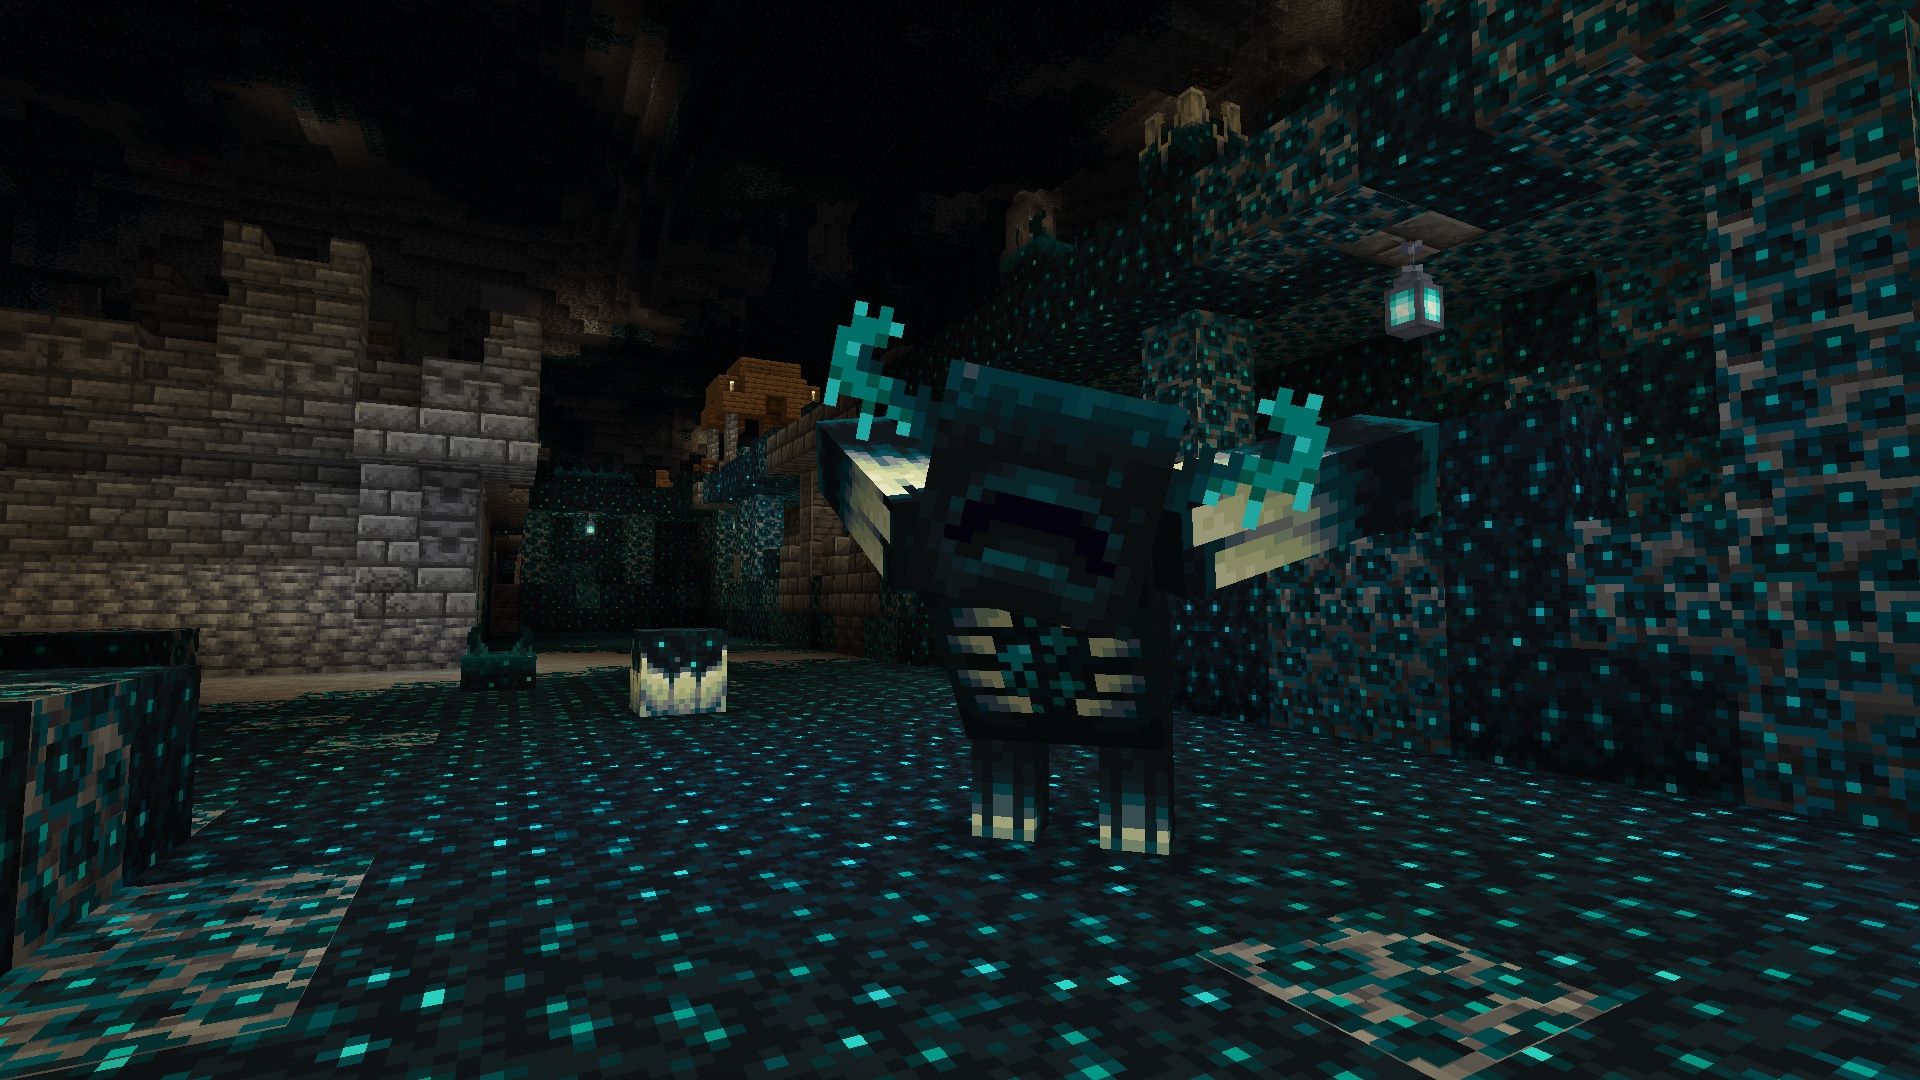 A warden mob confronts the player in the deep dark